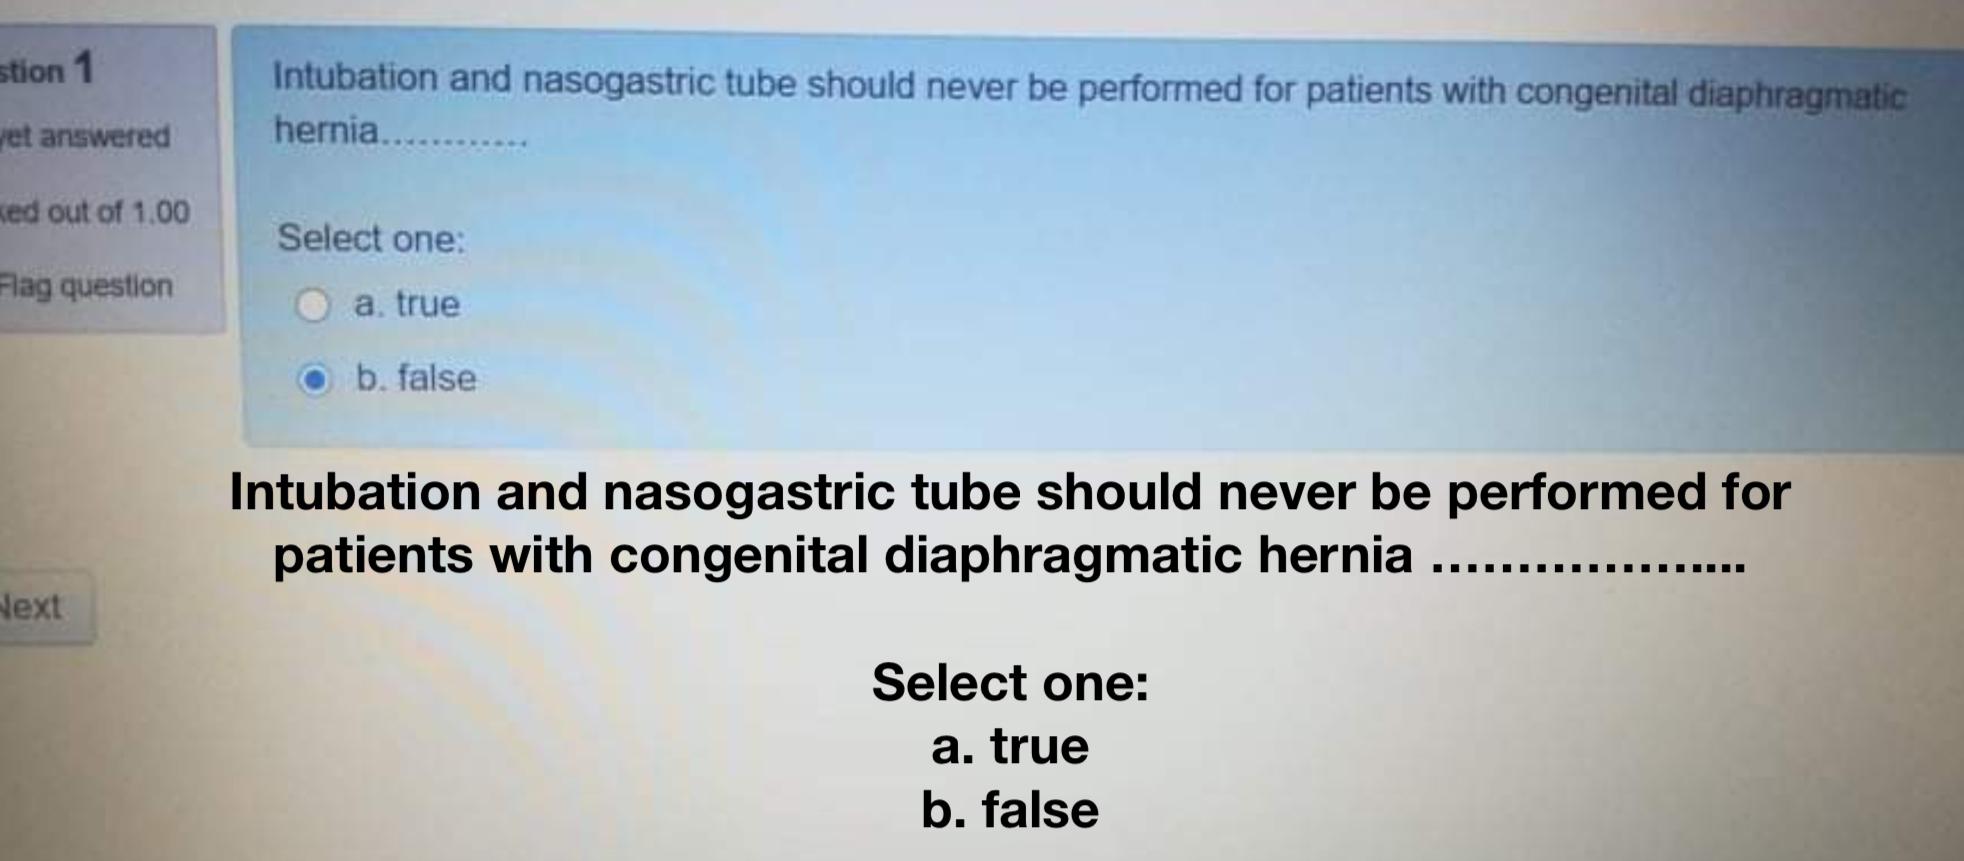 Intubation and nasogastric tube should never be performed for patients with congenital diaphragmatic hernia. Select one: a. t